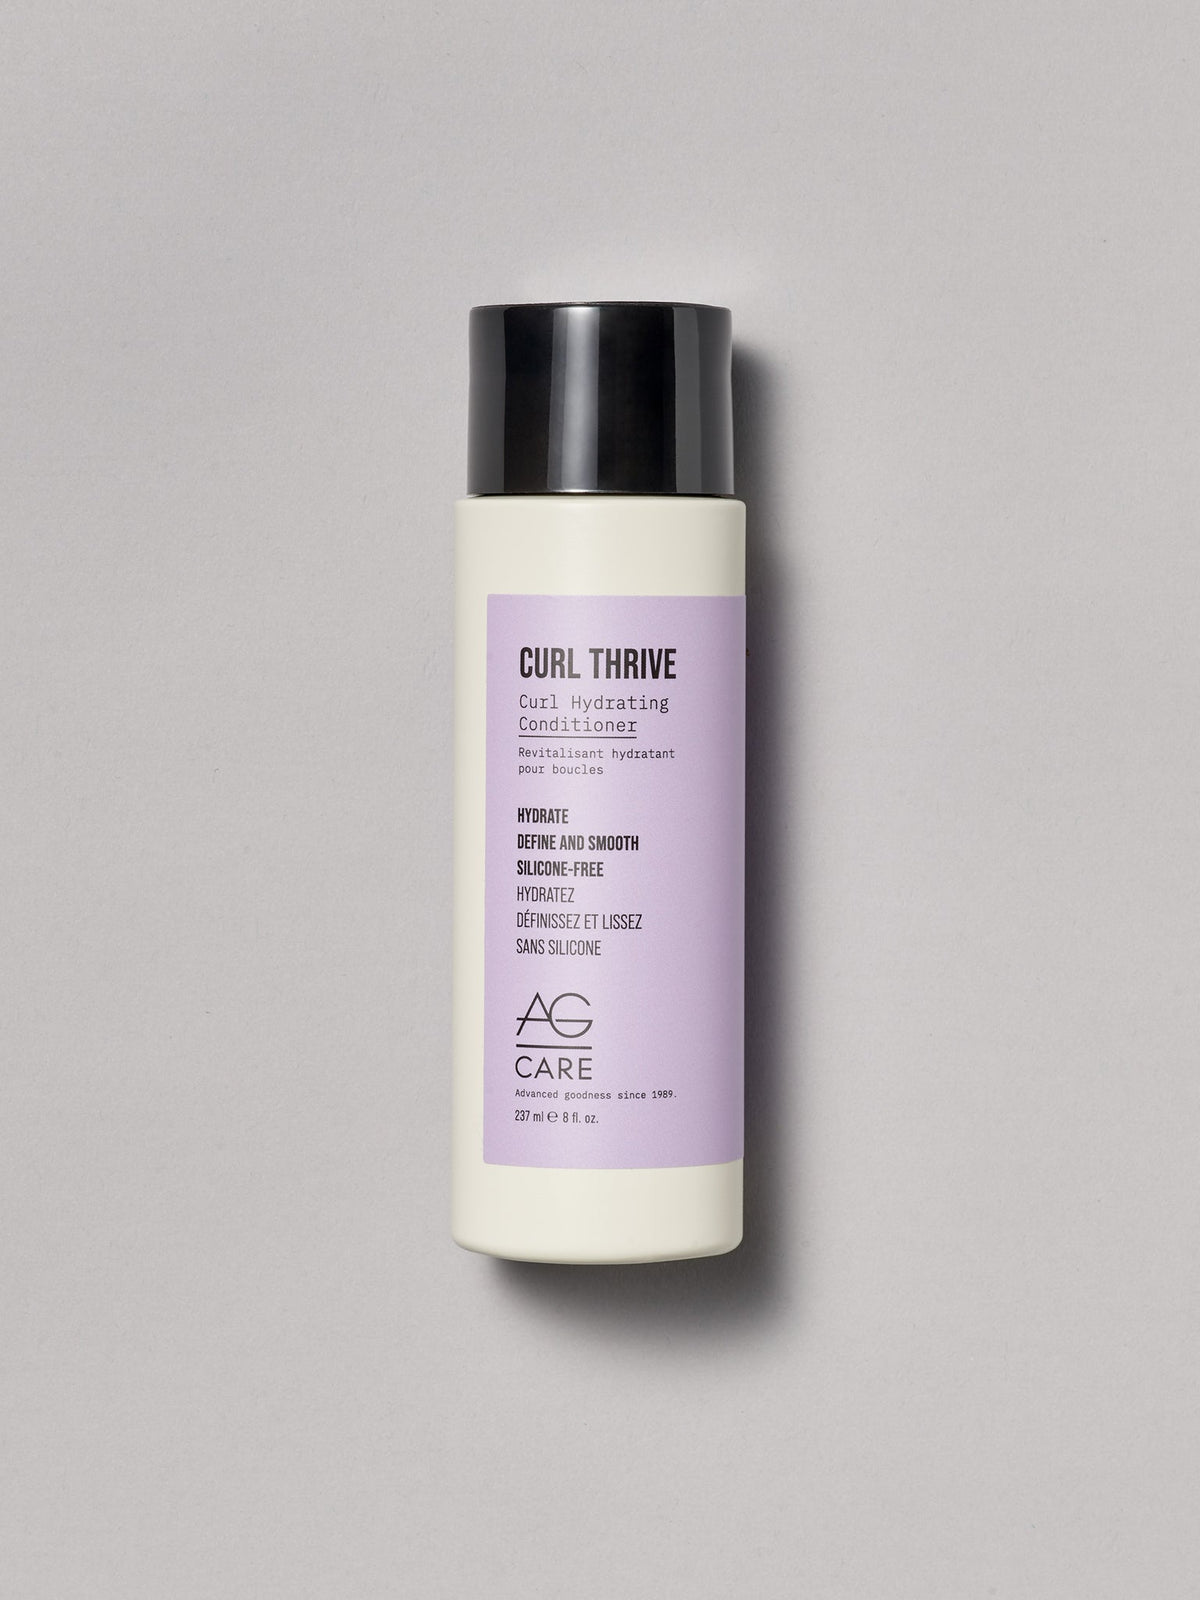 CURL THRIVE Curl Hydrating Conditioner - 8 oz - ProCare Outlet by AG Hair